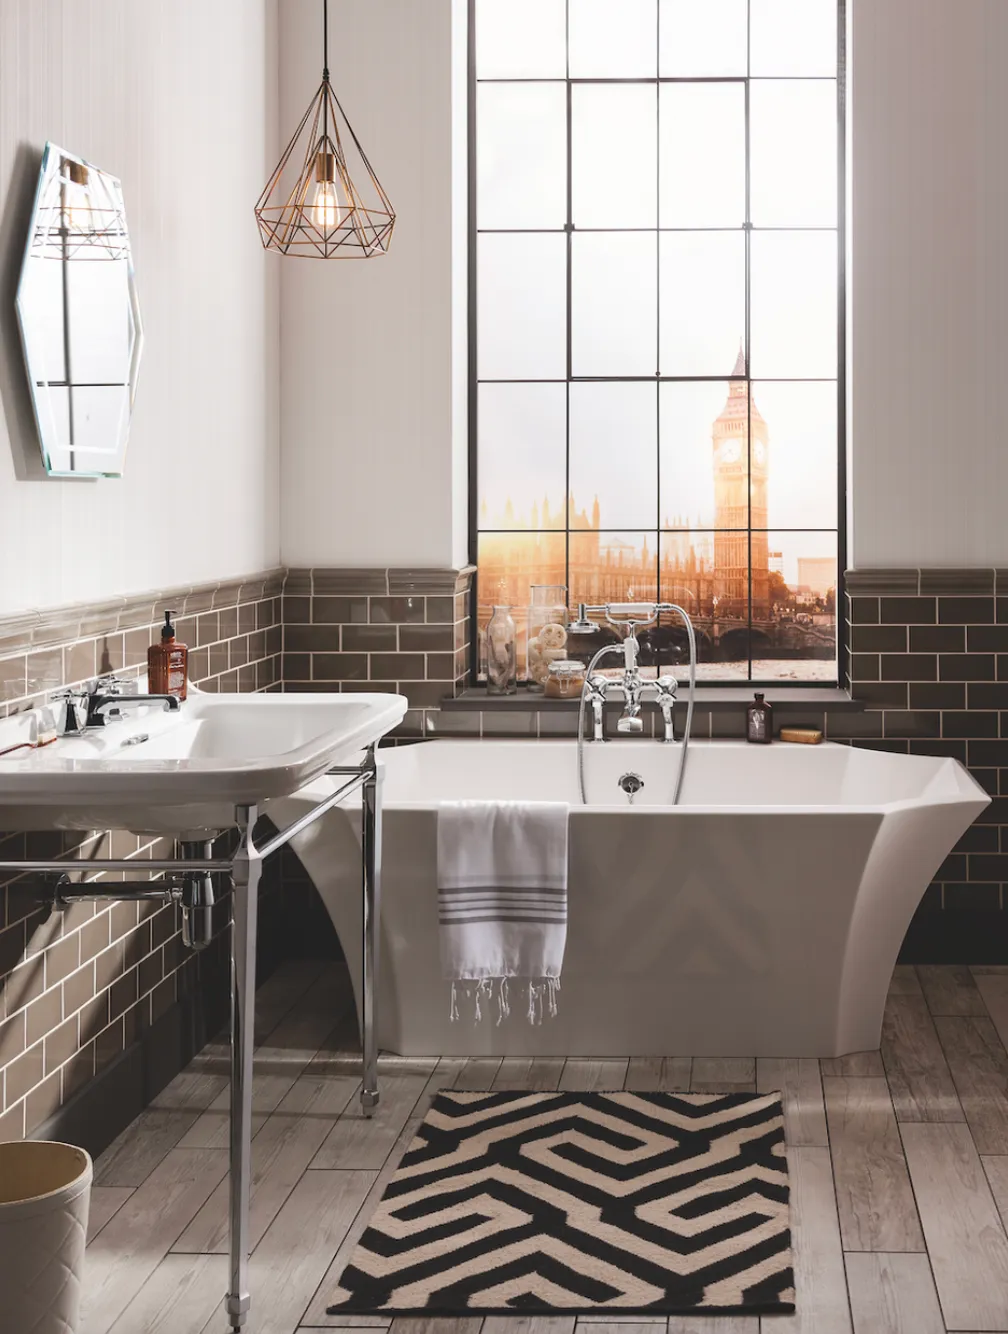 Make the most of glamorous curved designs, such as the Waldorf bath (£2,529, by Crosswater) to make a standout statement. Its clever design means it has a vast width of 1,645mm, which reduces down to just 1,158mm on the floor, creating the illusion of a bigger bathroom